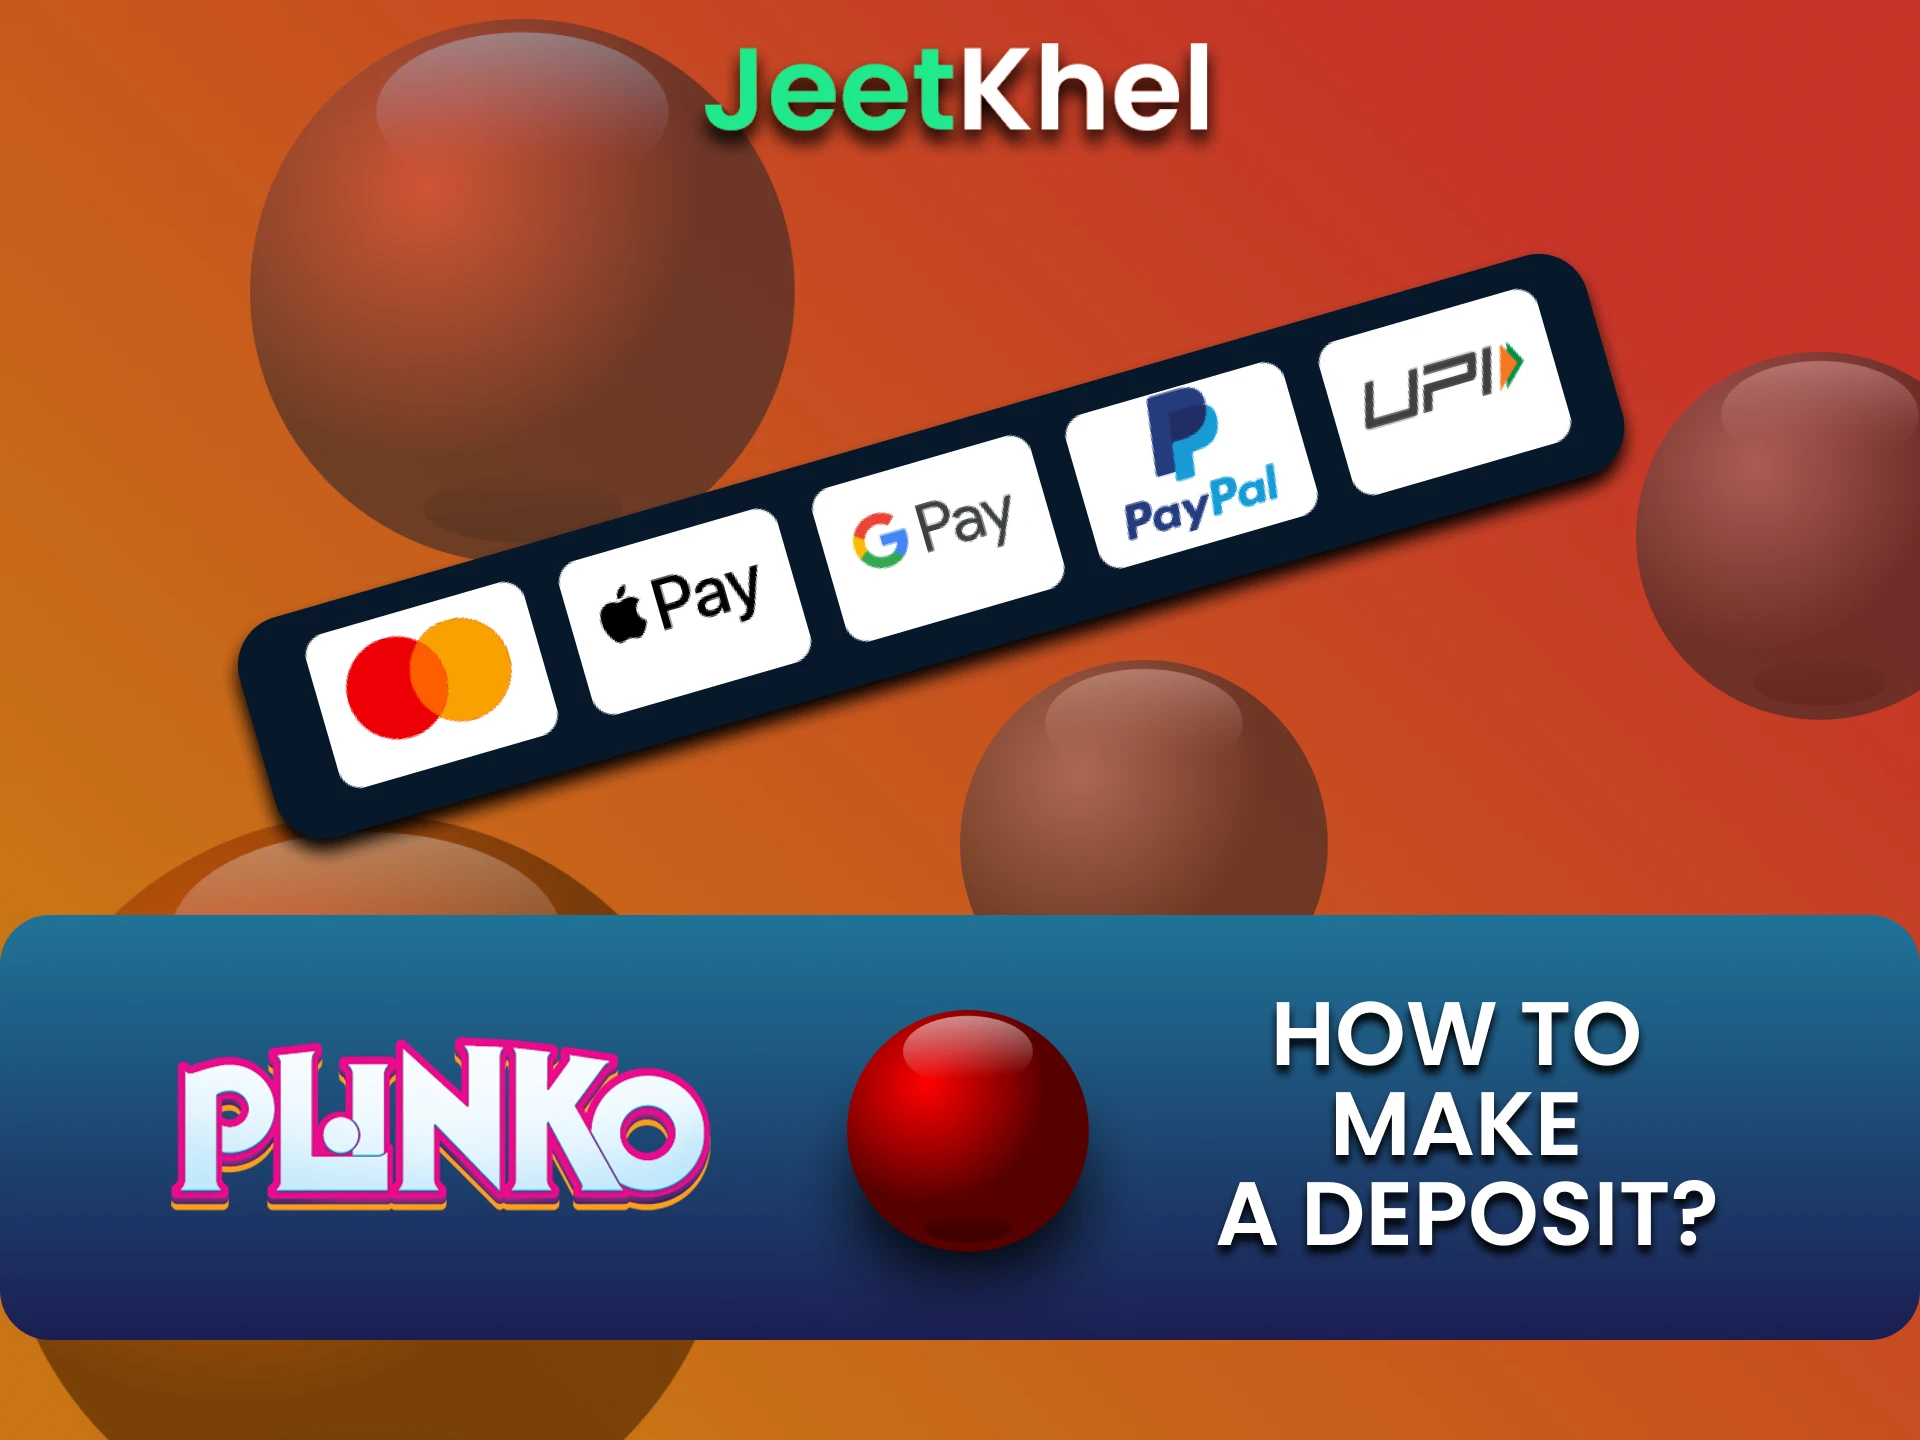 Choose a convenient way to replenish funds for Plinko on JeetKhel.